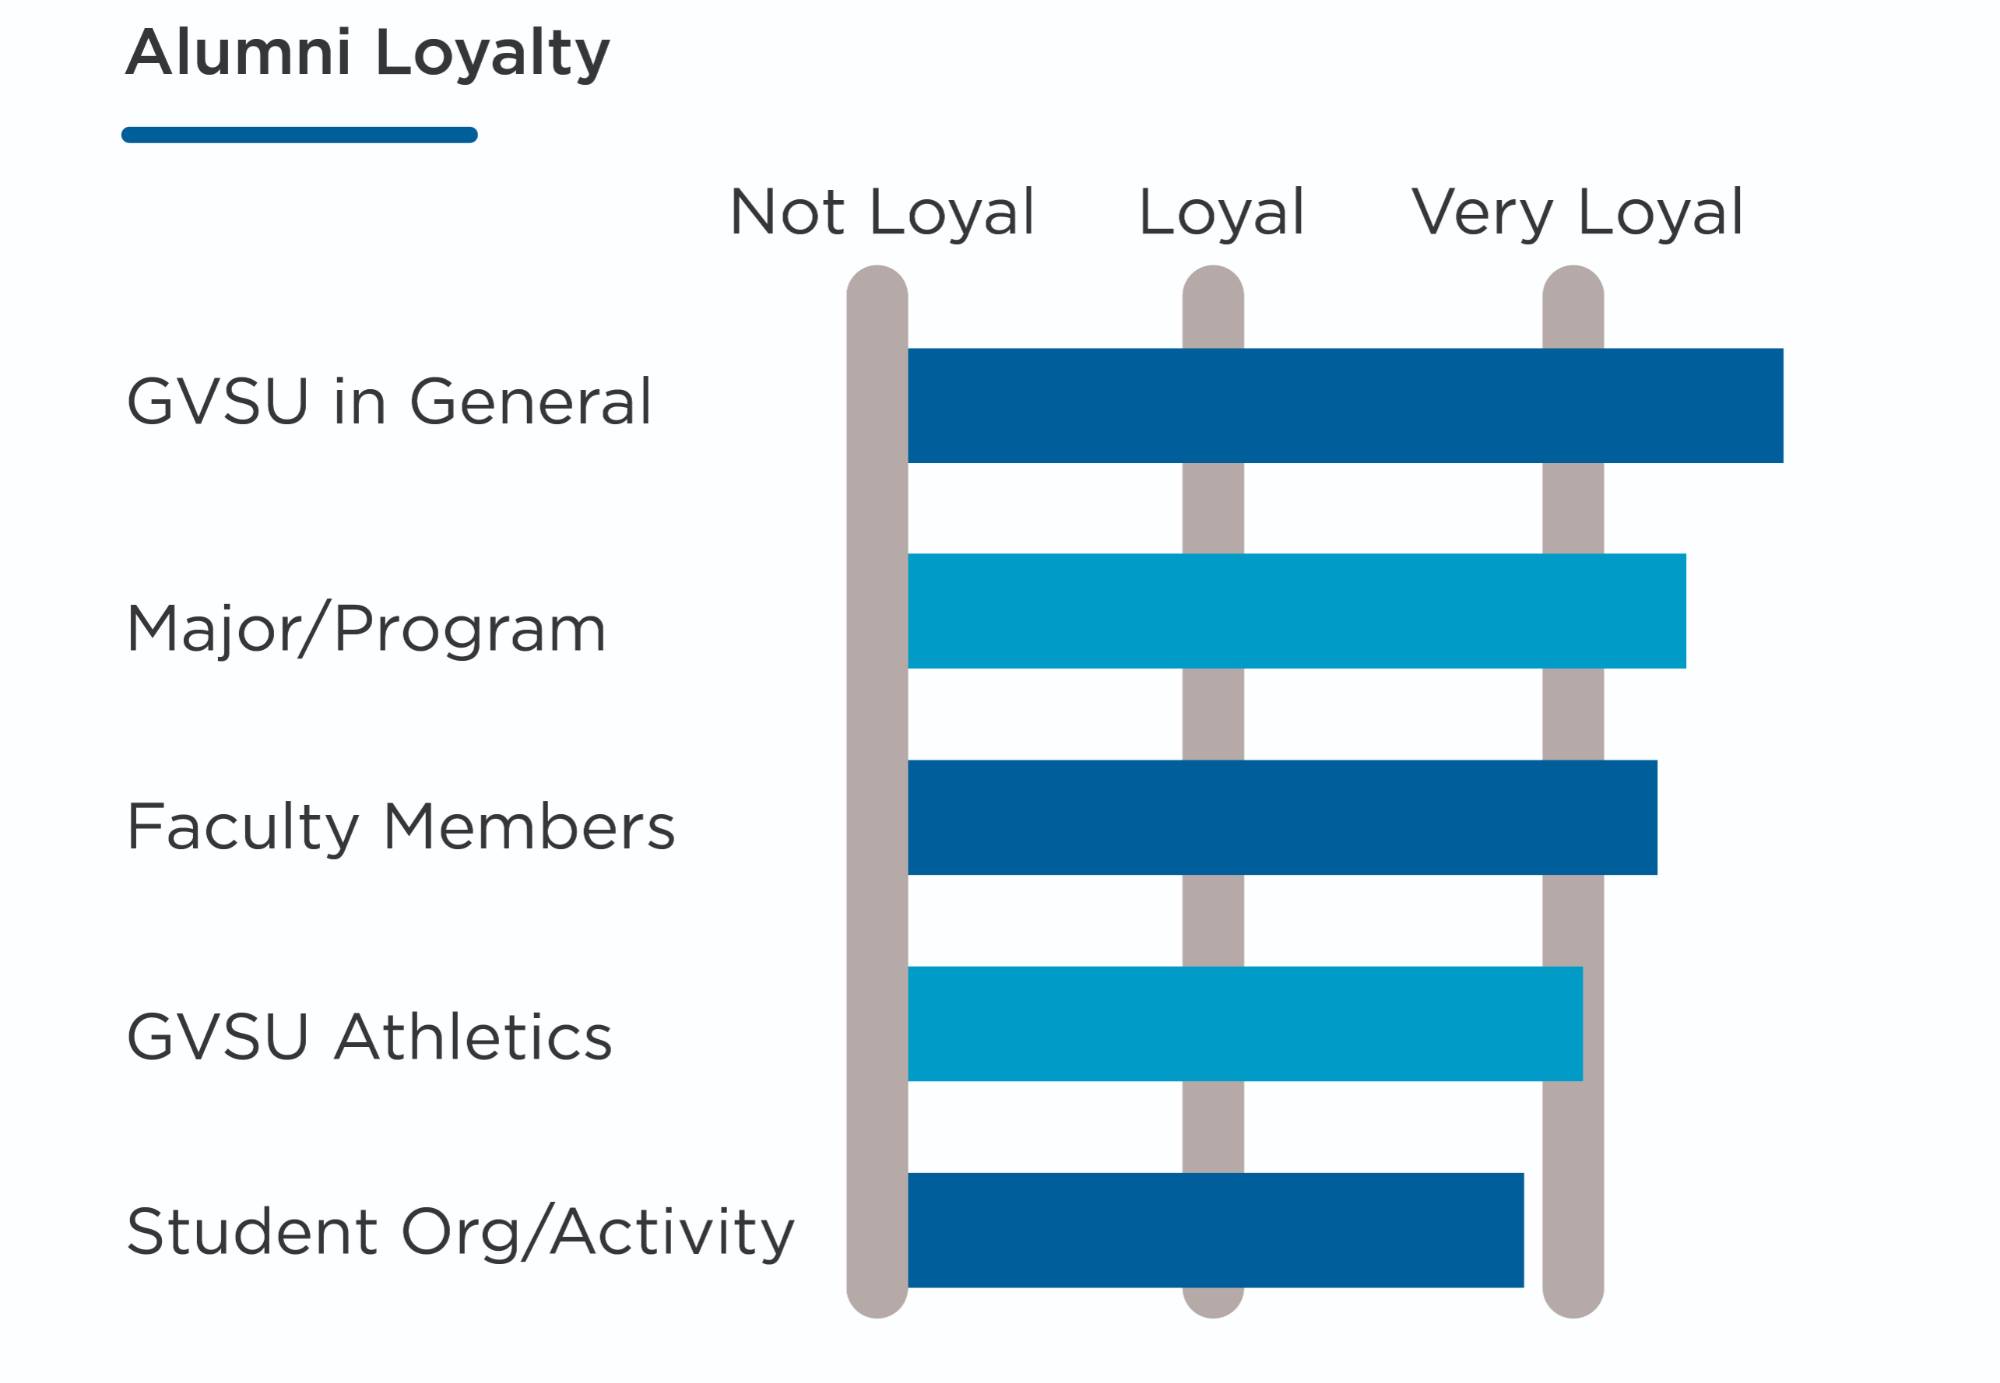 Alumni Loyalty. On a sliding scale from not loyal to very loyal, alumni said they are very loyal to GVSU in general, very loyal to their major or program, very loyal to a faculty member(s), loyal to GVSU athletics, and loyal to a student organization or activity they were involved in.